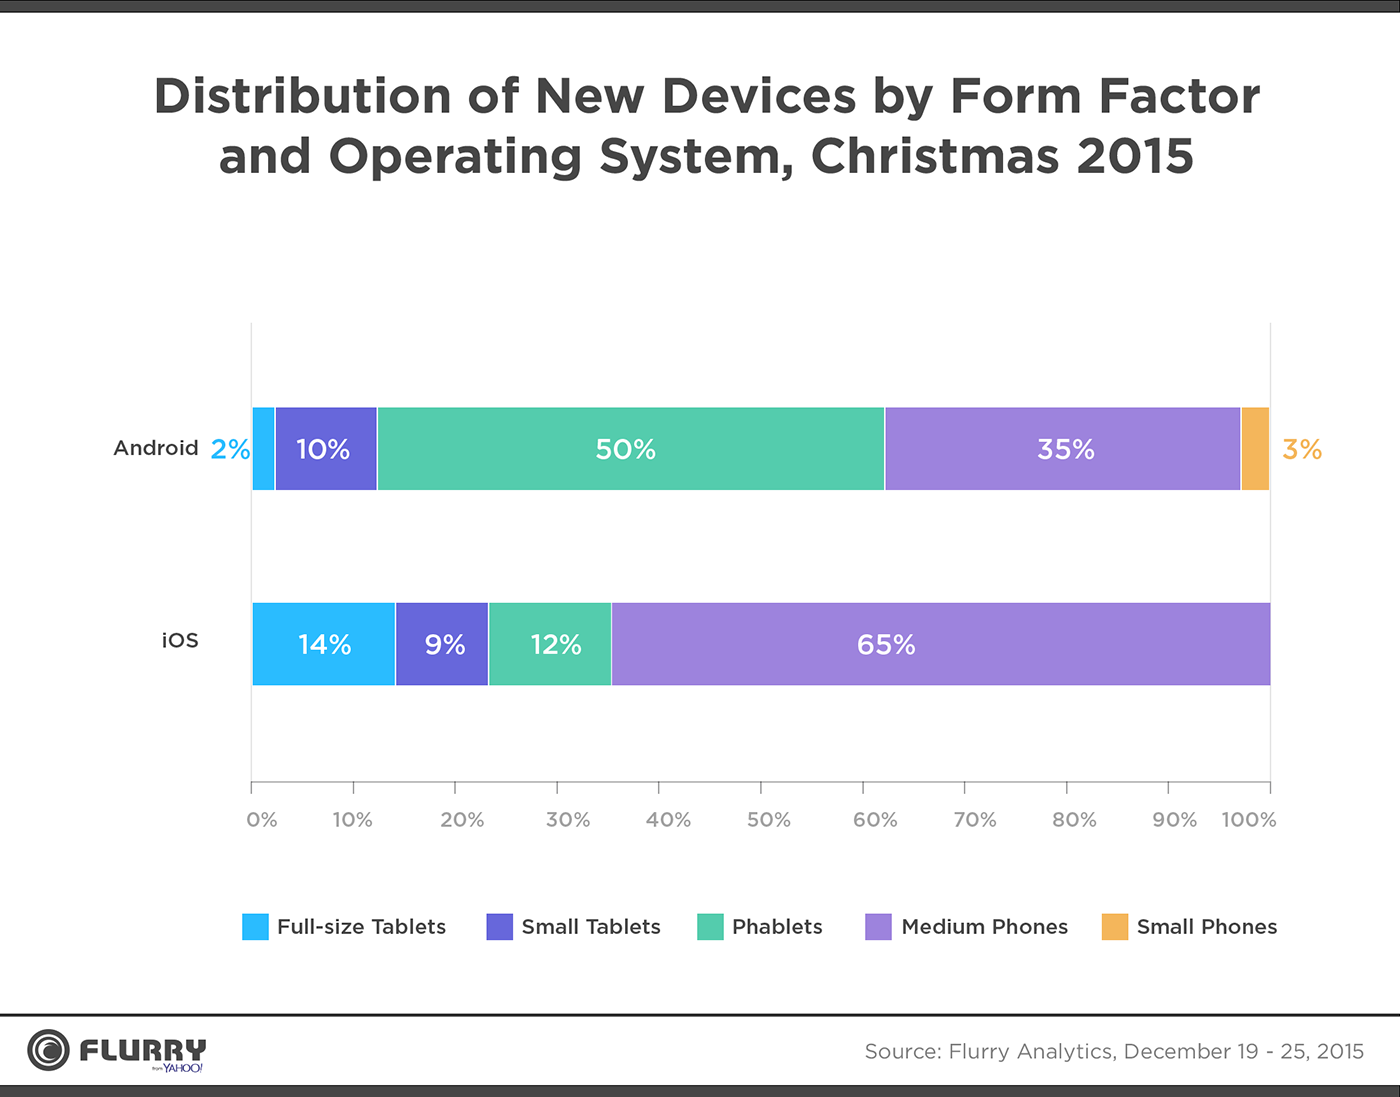 Distribution of New Devices by Form Factor and Operating System, Christmas 2015 - Full size tablets, small tablets, phablets, medium phones, small phones